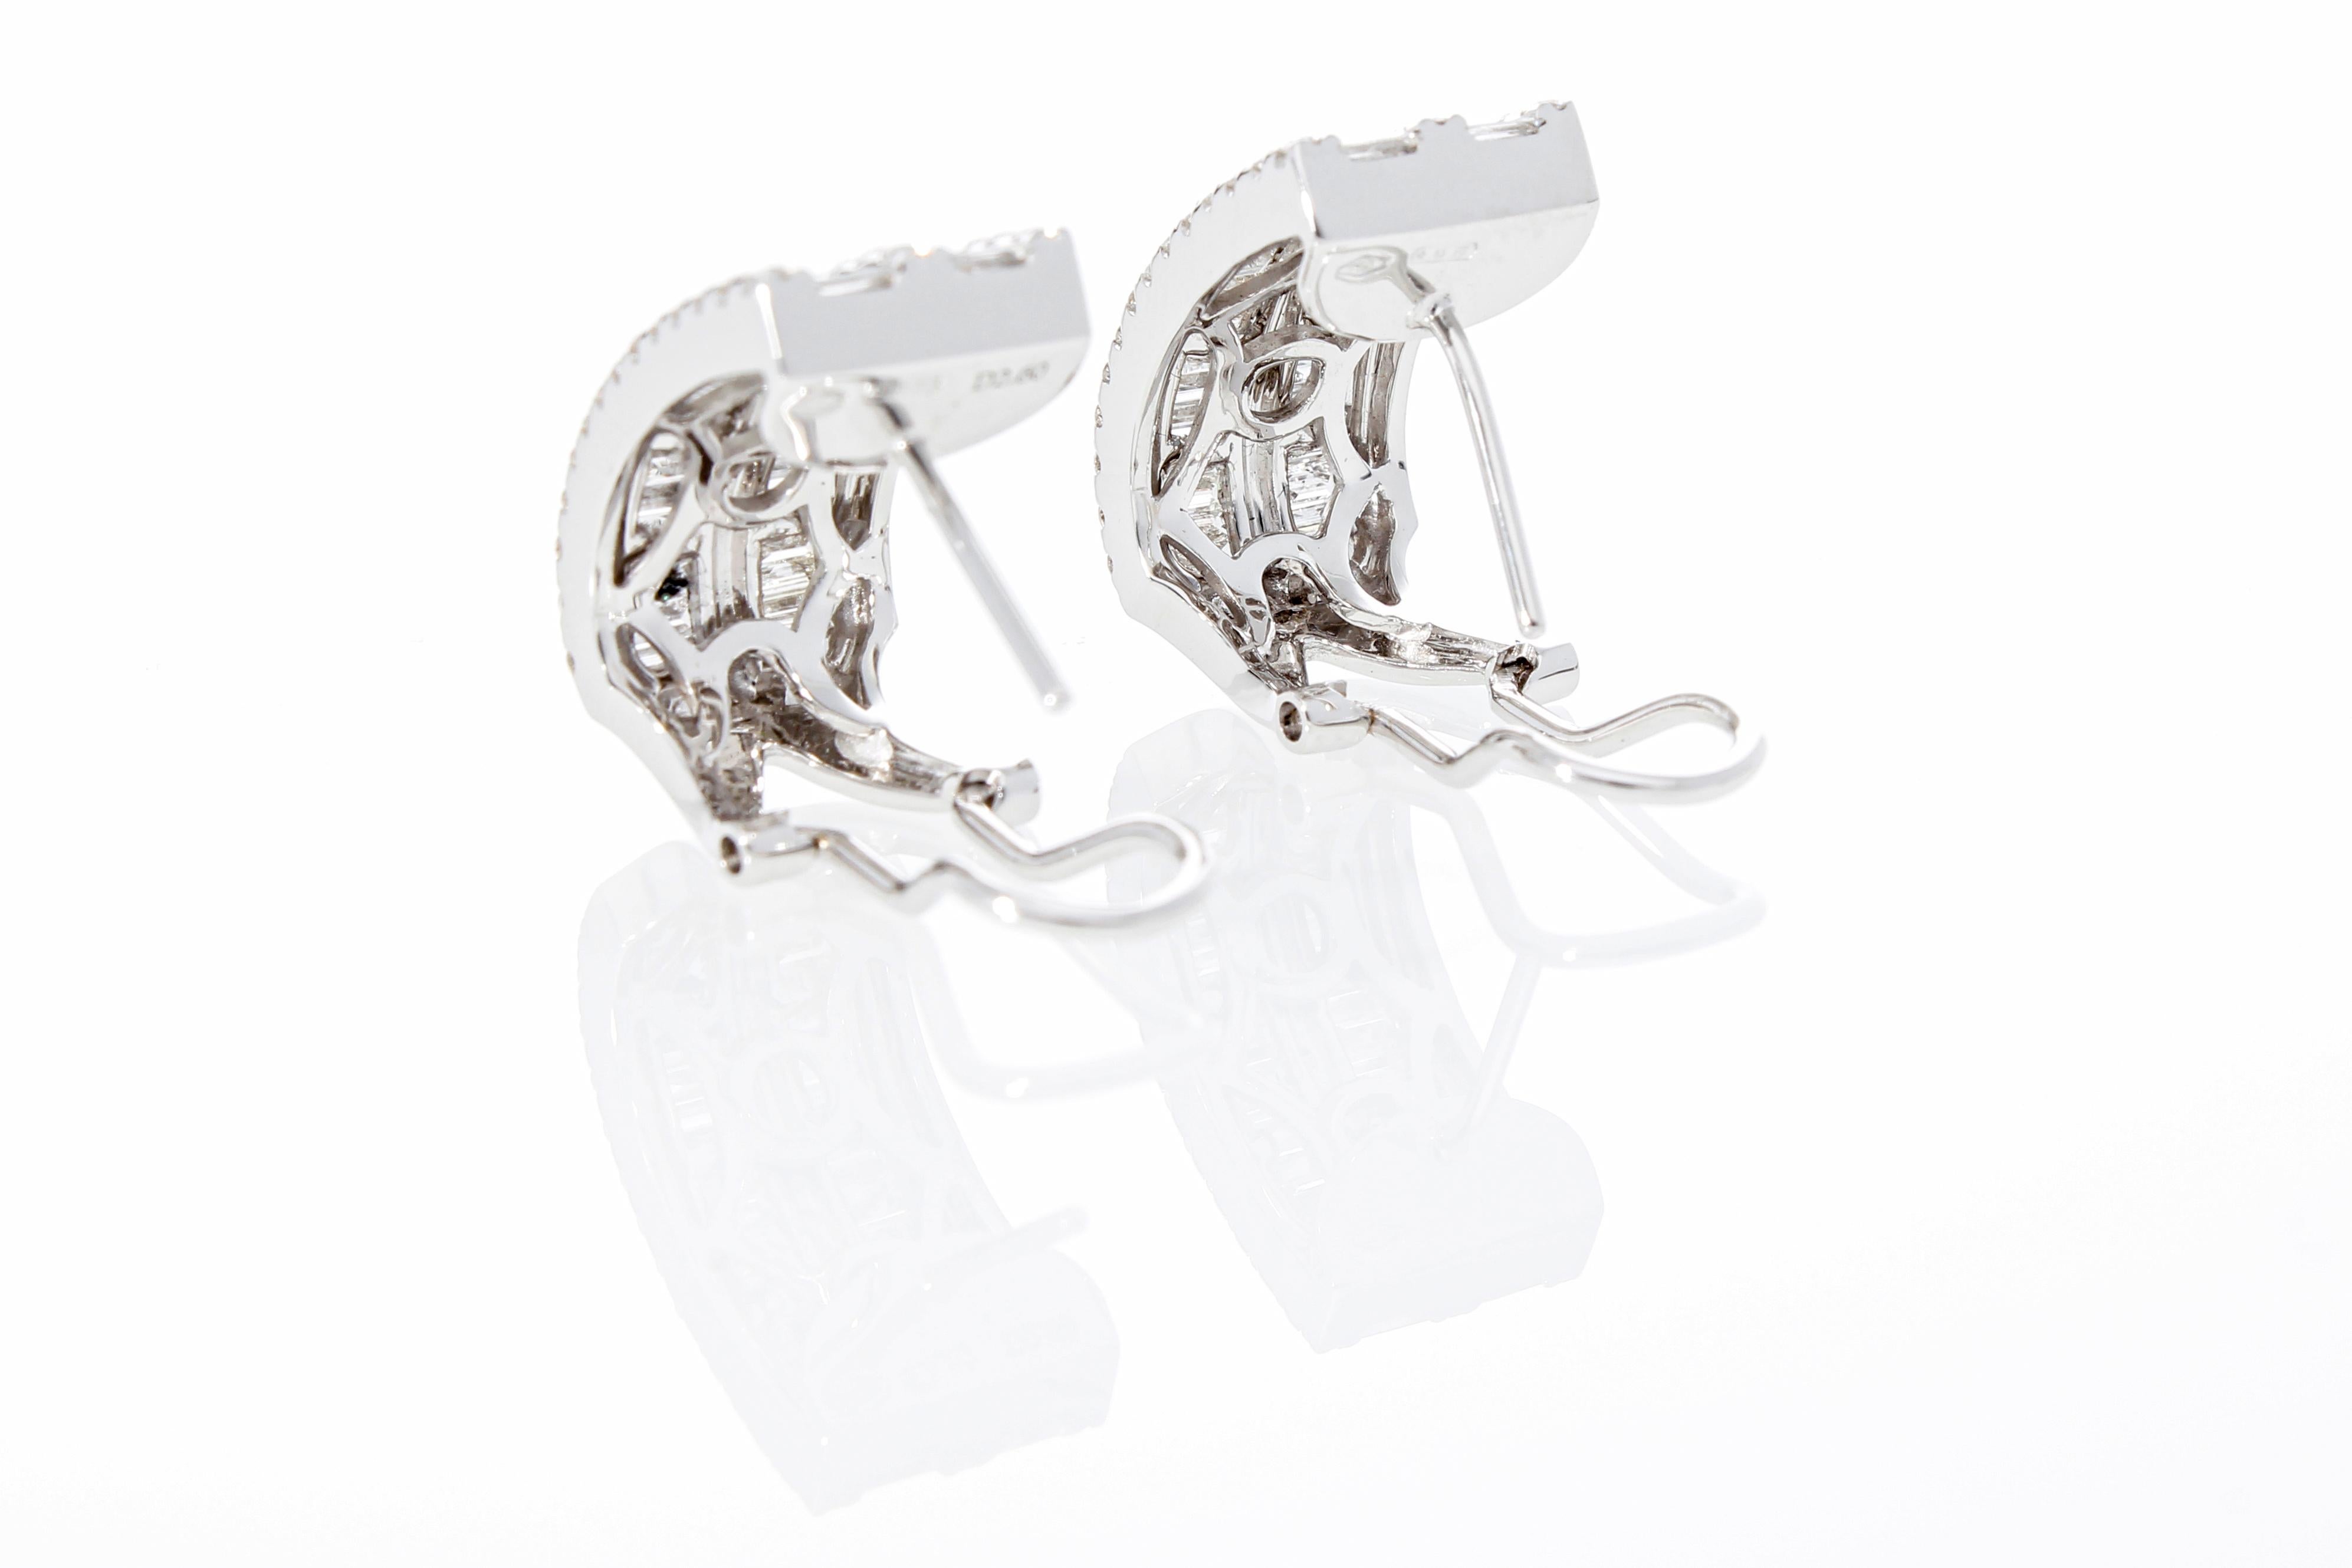 Earrings with 2.60 Ct of Baguette and Diamond Cut Diamonds, 18 Kt Gold For Sale 3